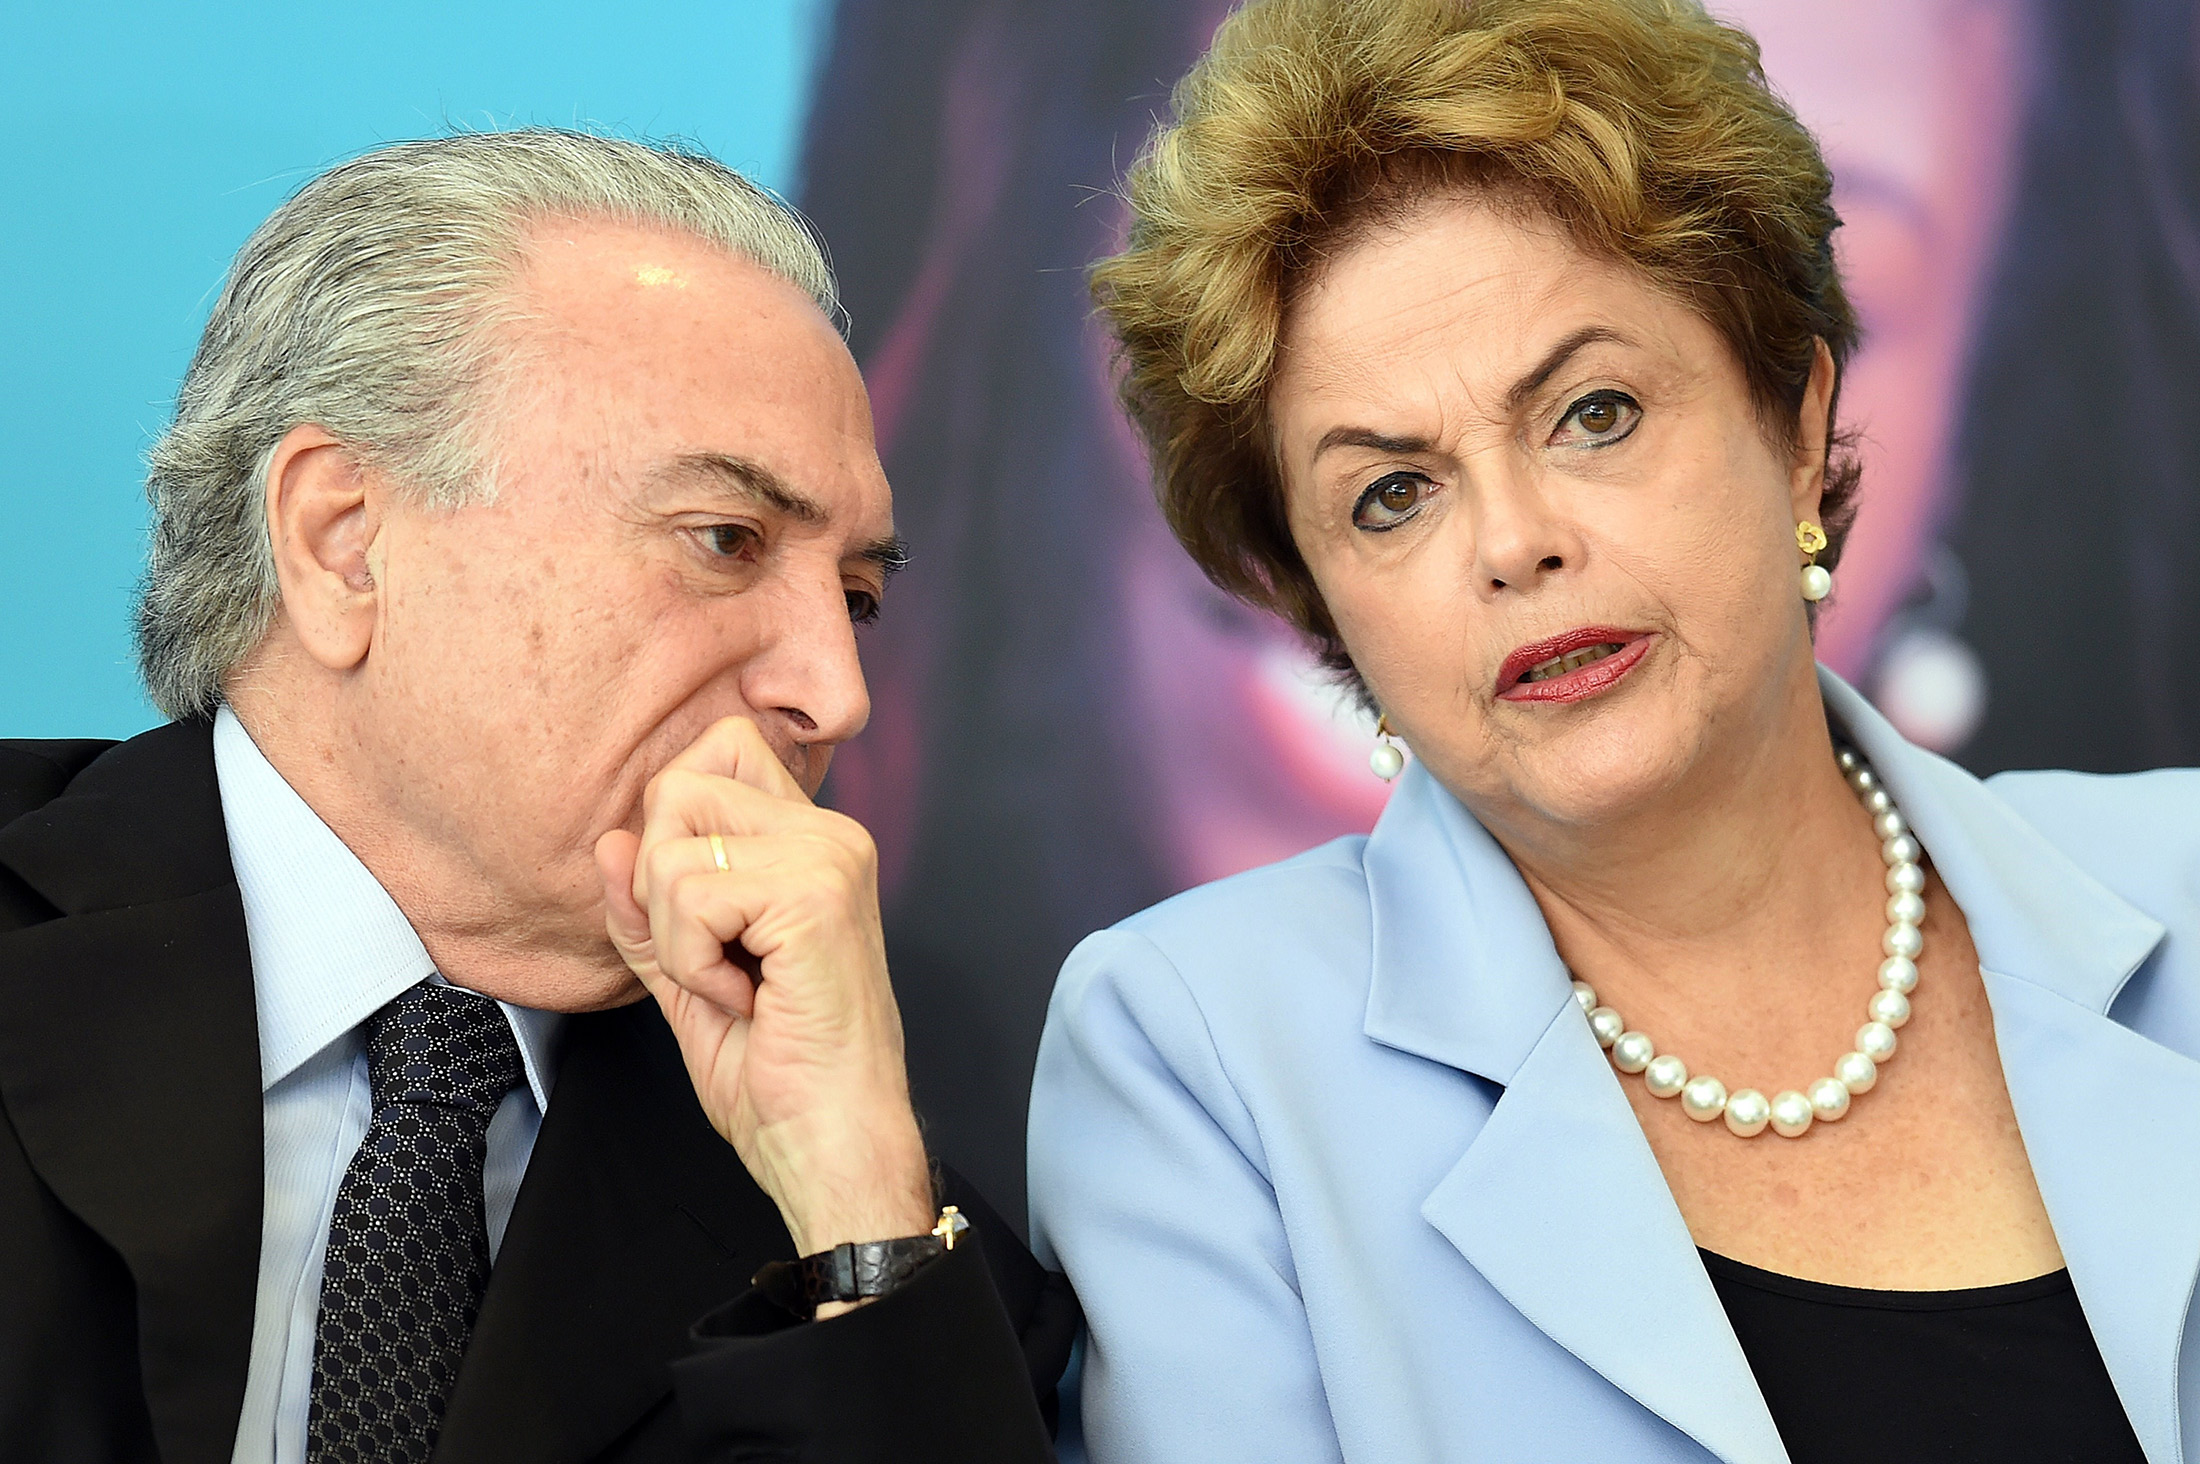 Michel Temer and Dilma Rousseff.
